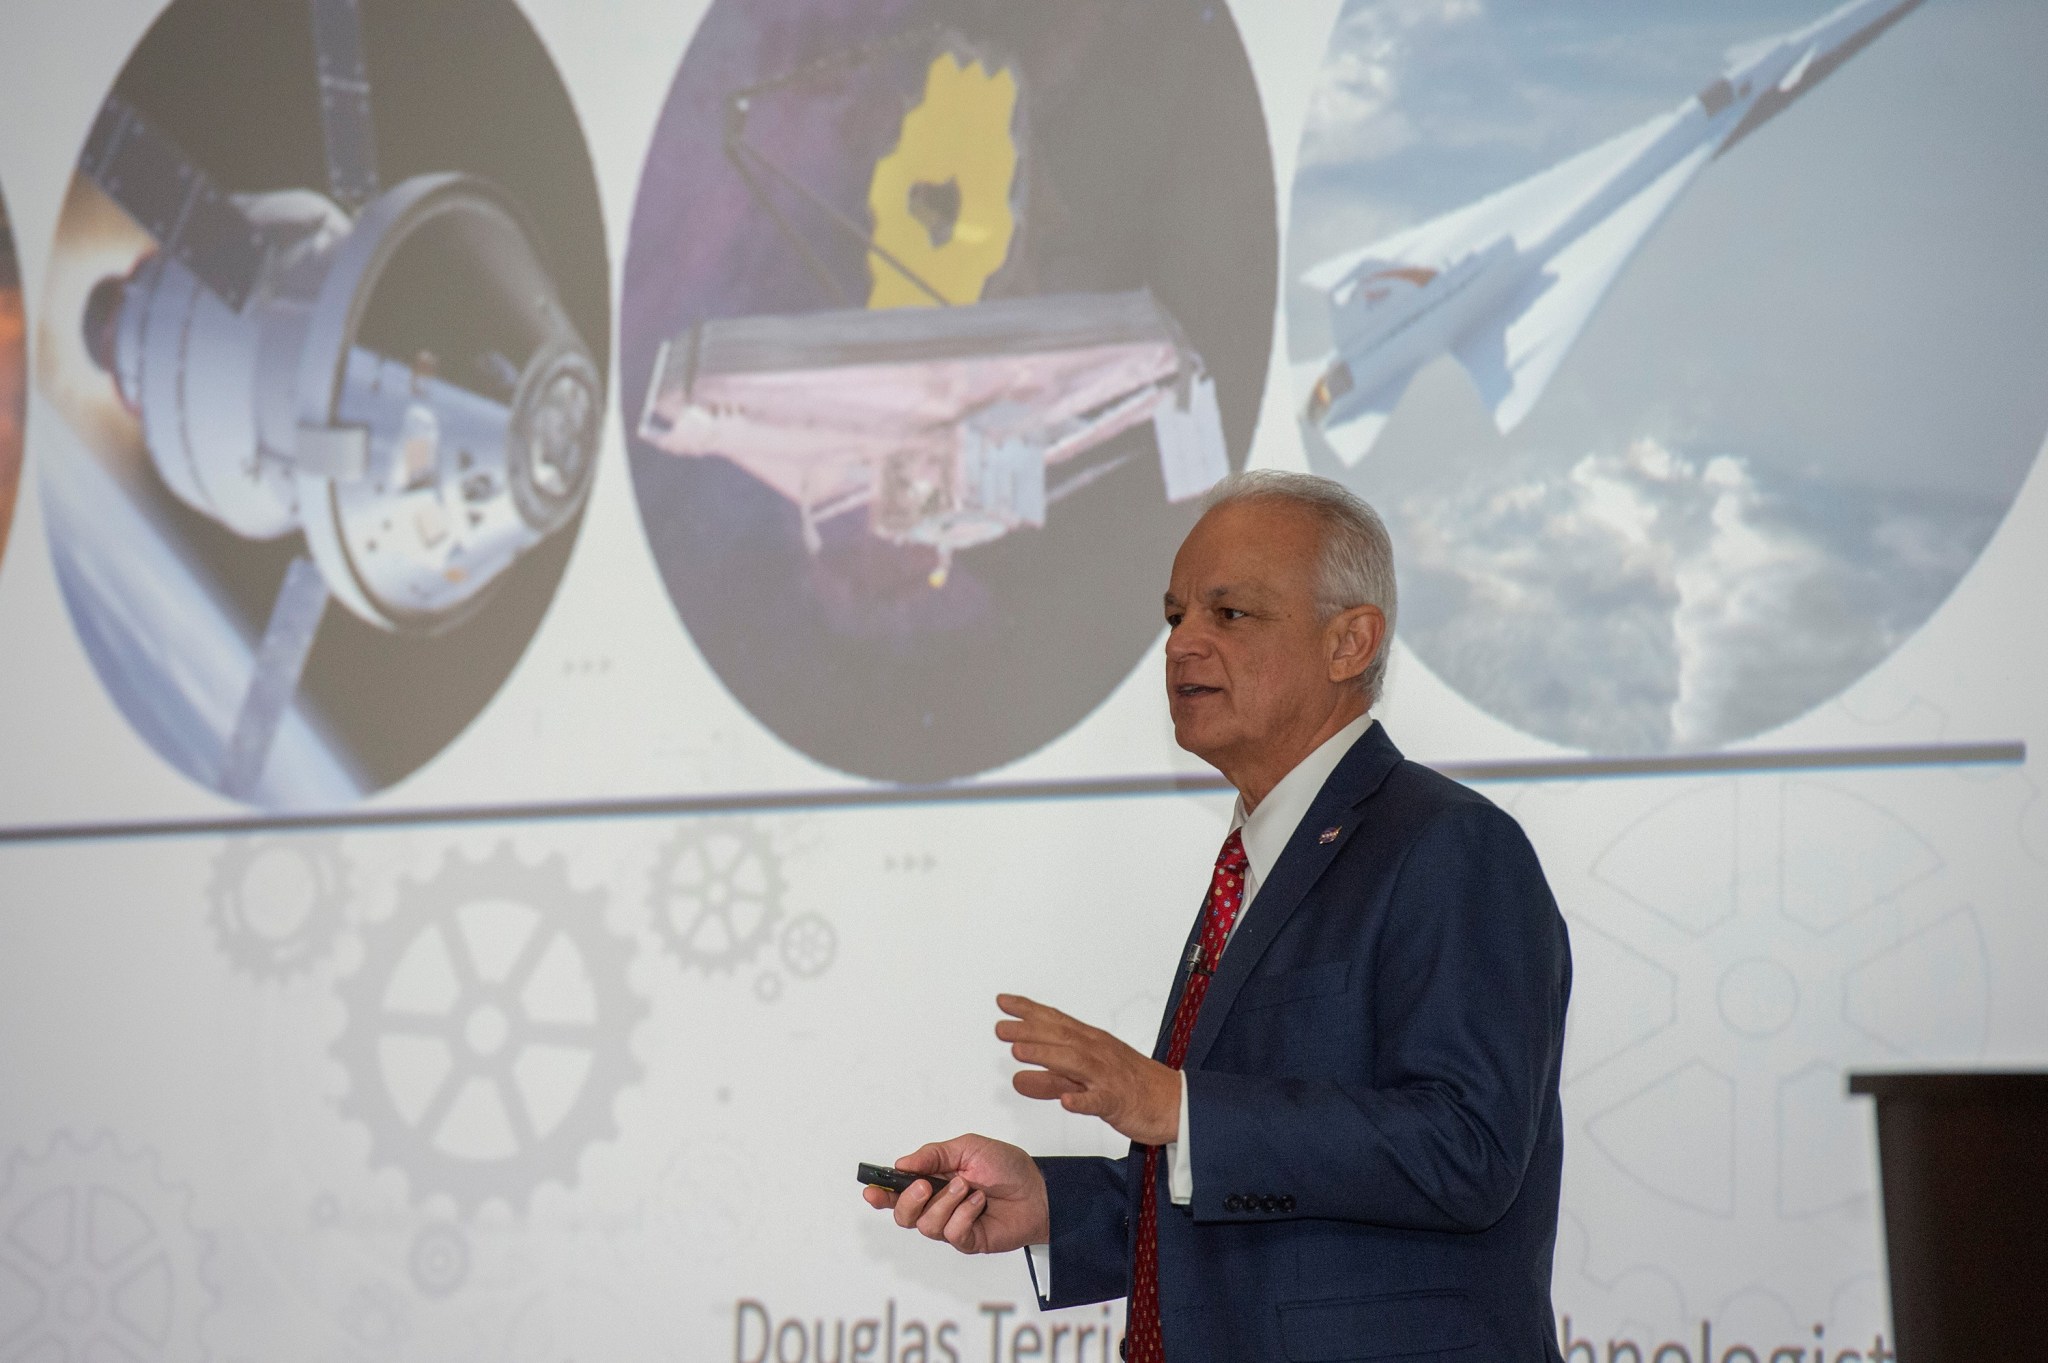 “Innovation is not optional,” says Douglas Terrier, NASA chief technologist, during a talk about innovation at the agency Dec. 3